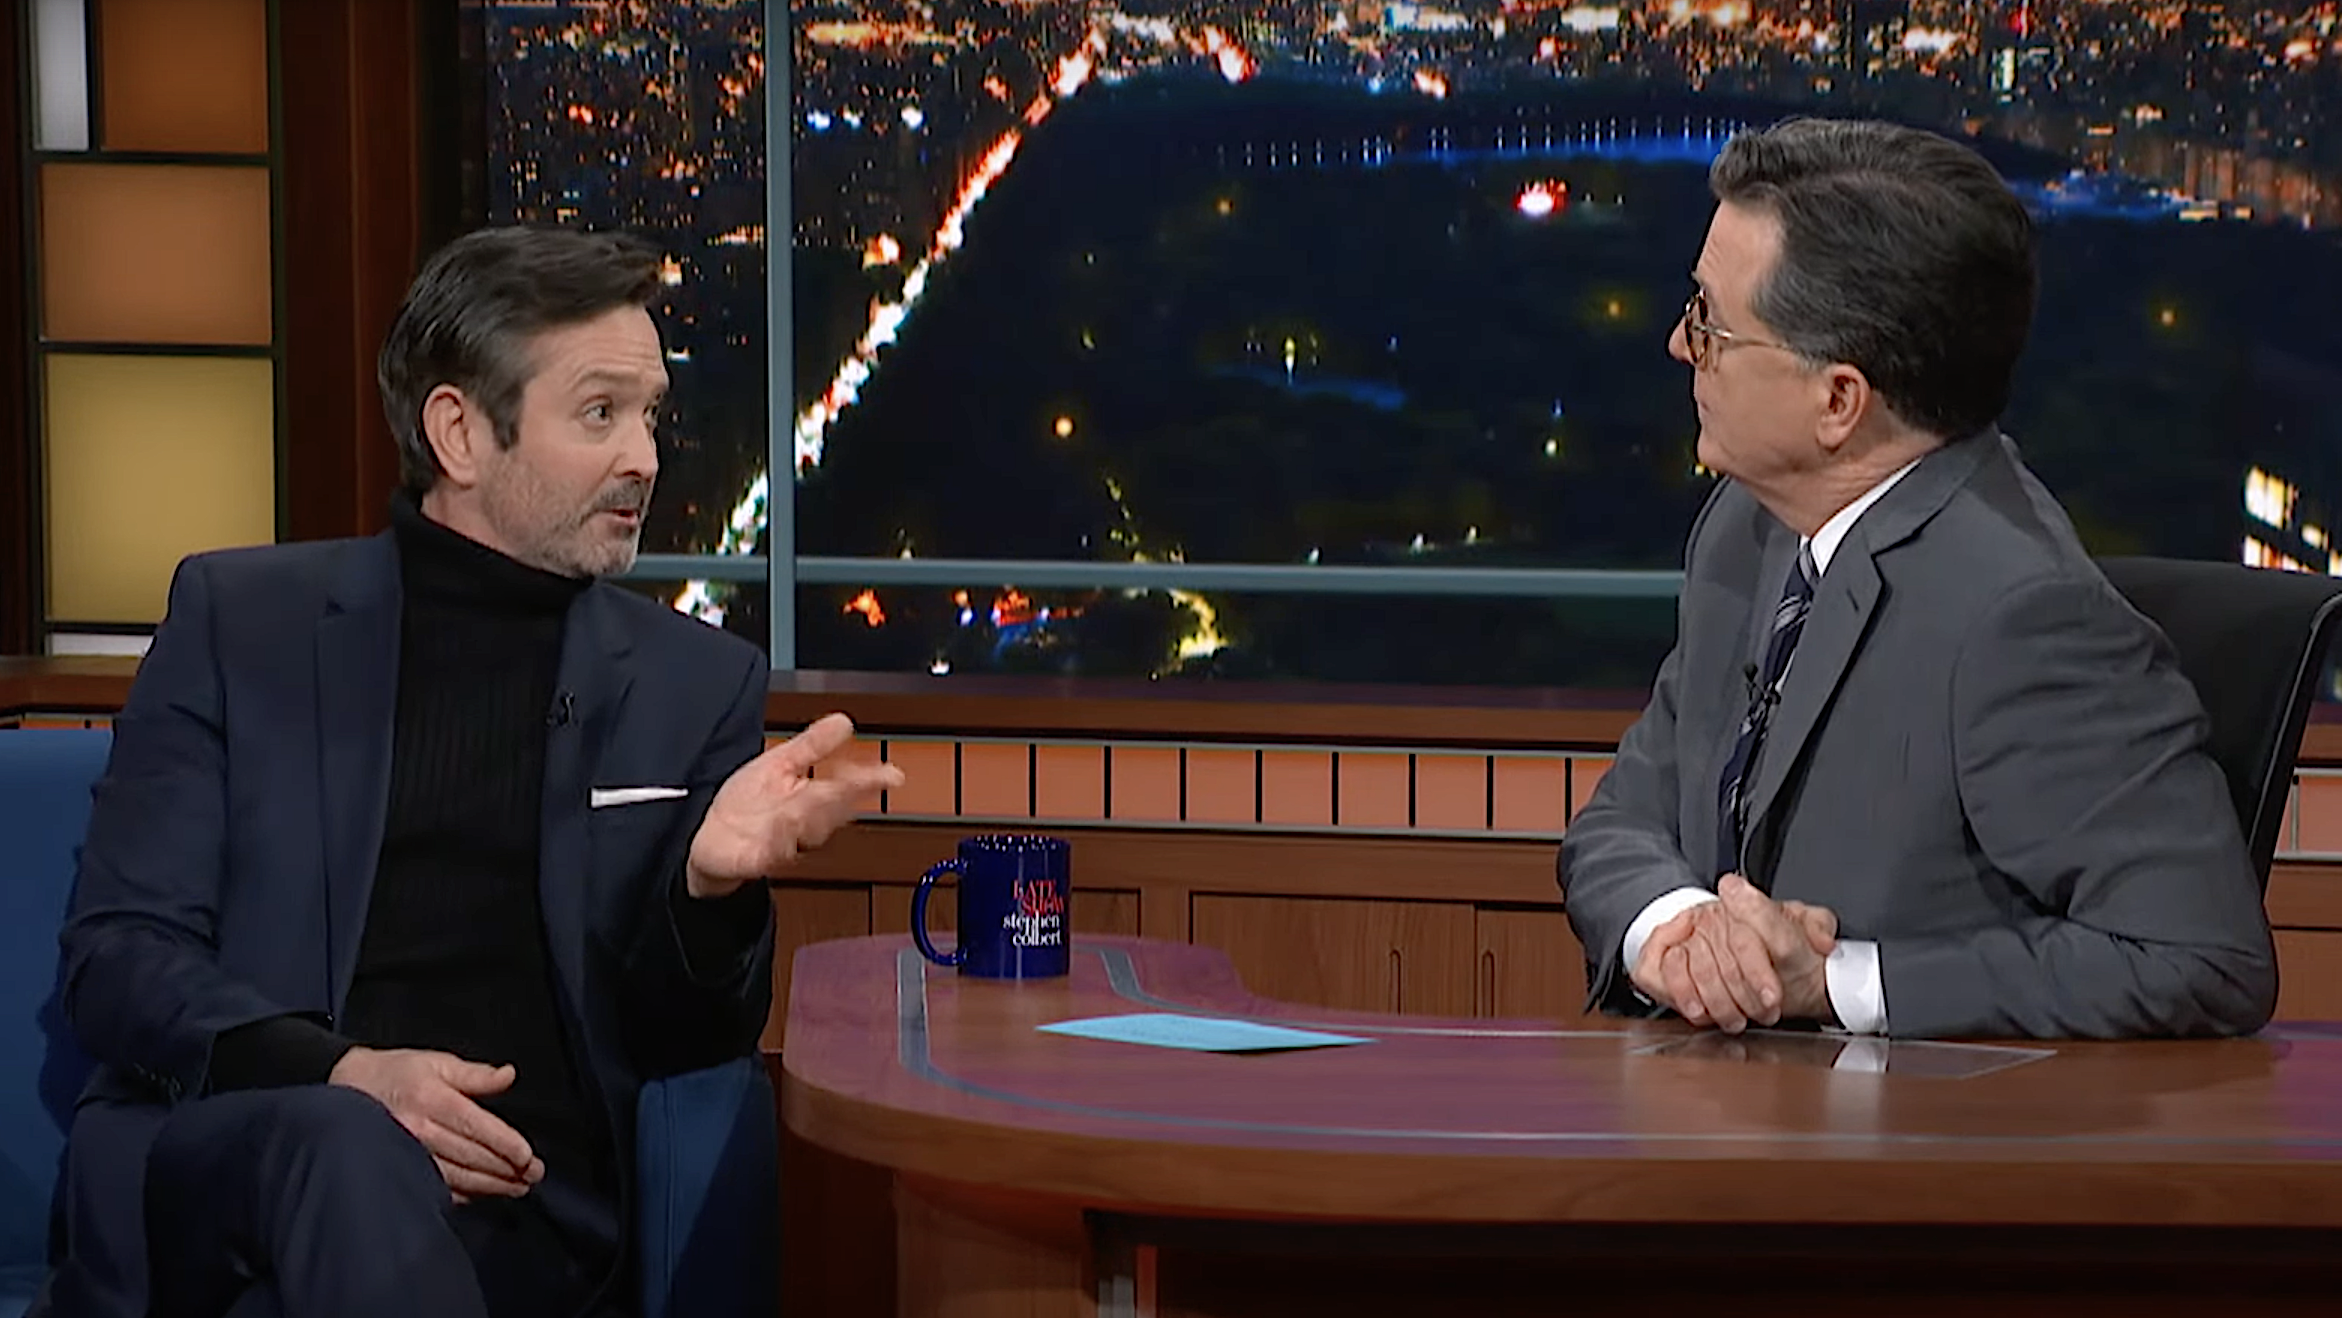 On The Late Show, Thomas Lennon reveals the secret to becoming Weird Al’s best friend